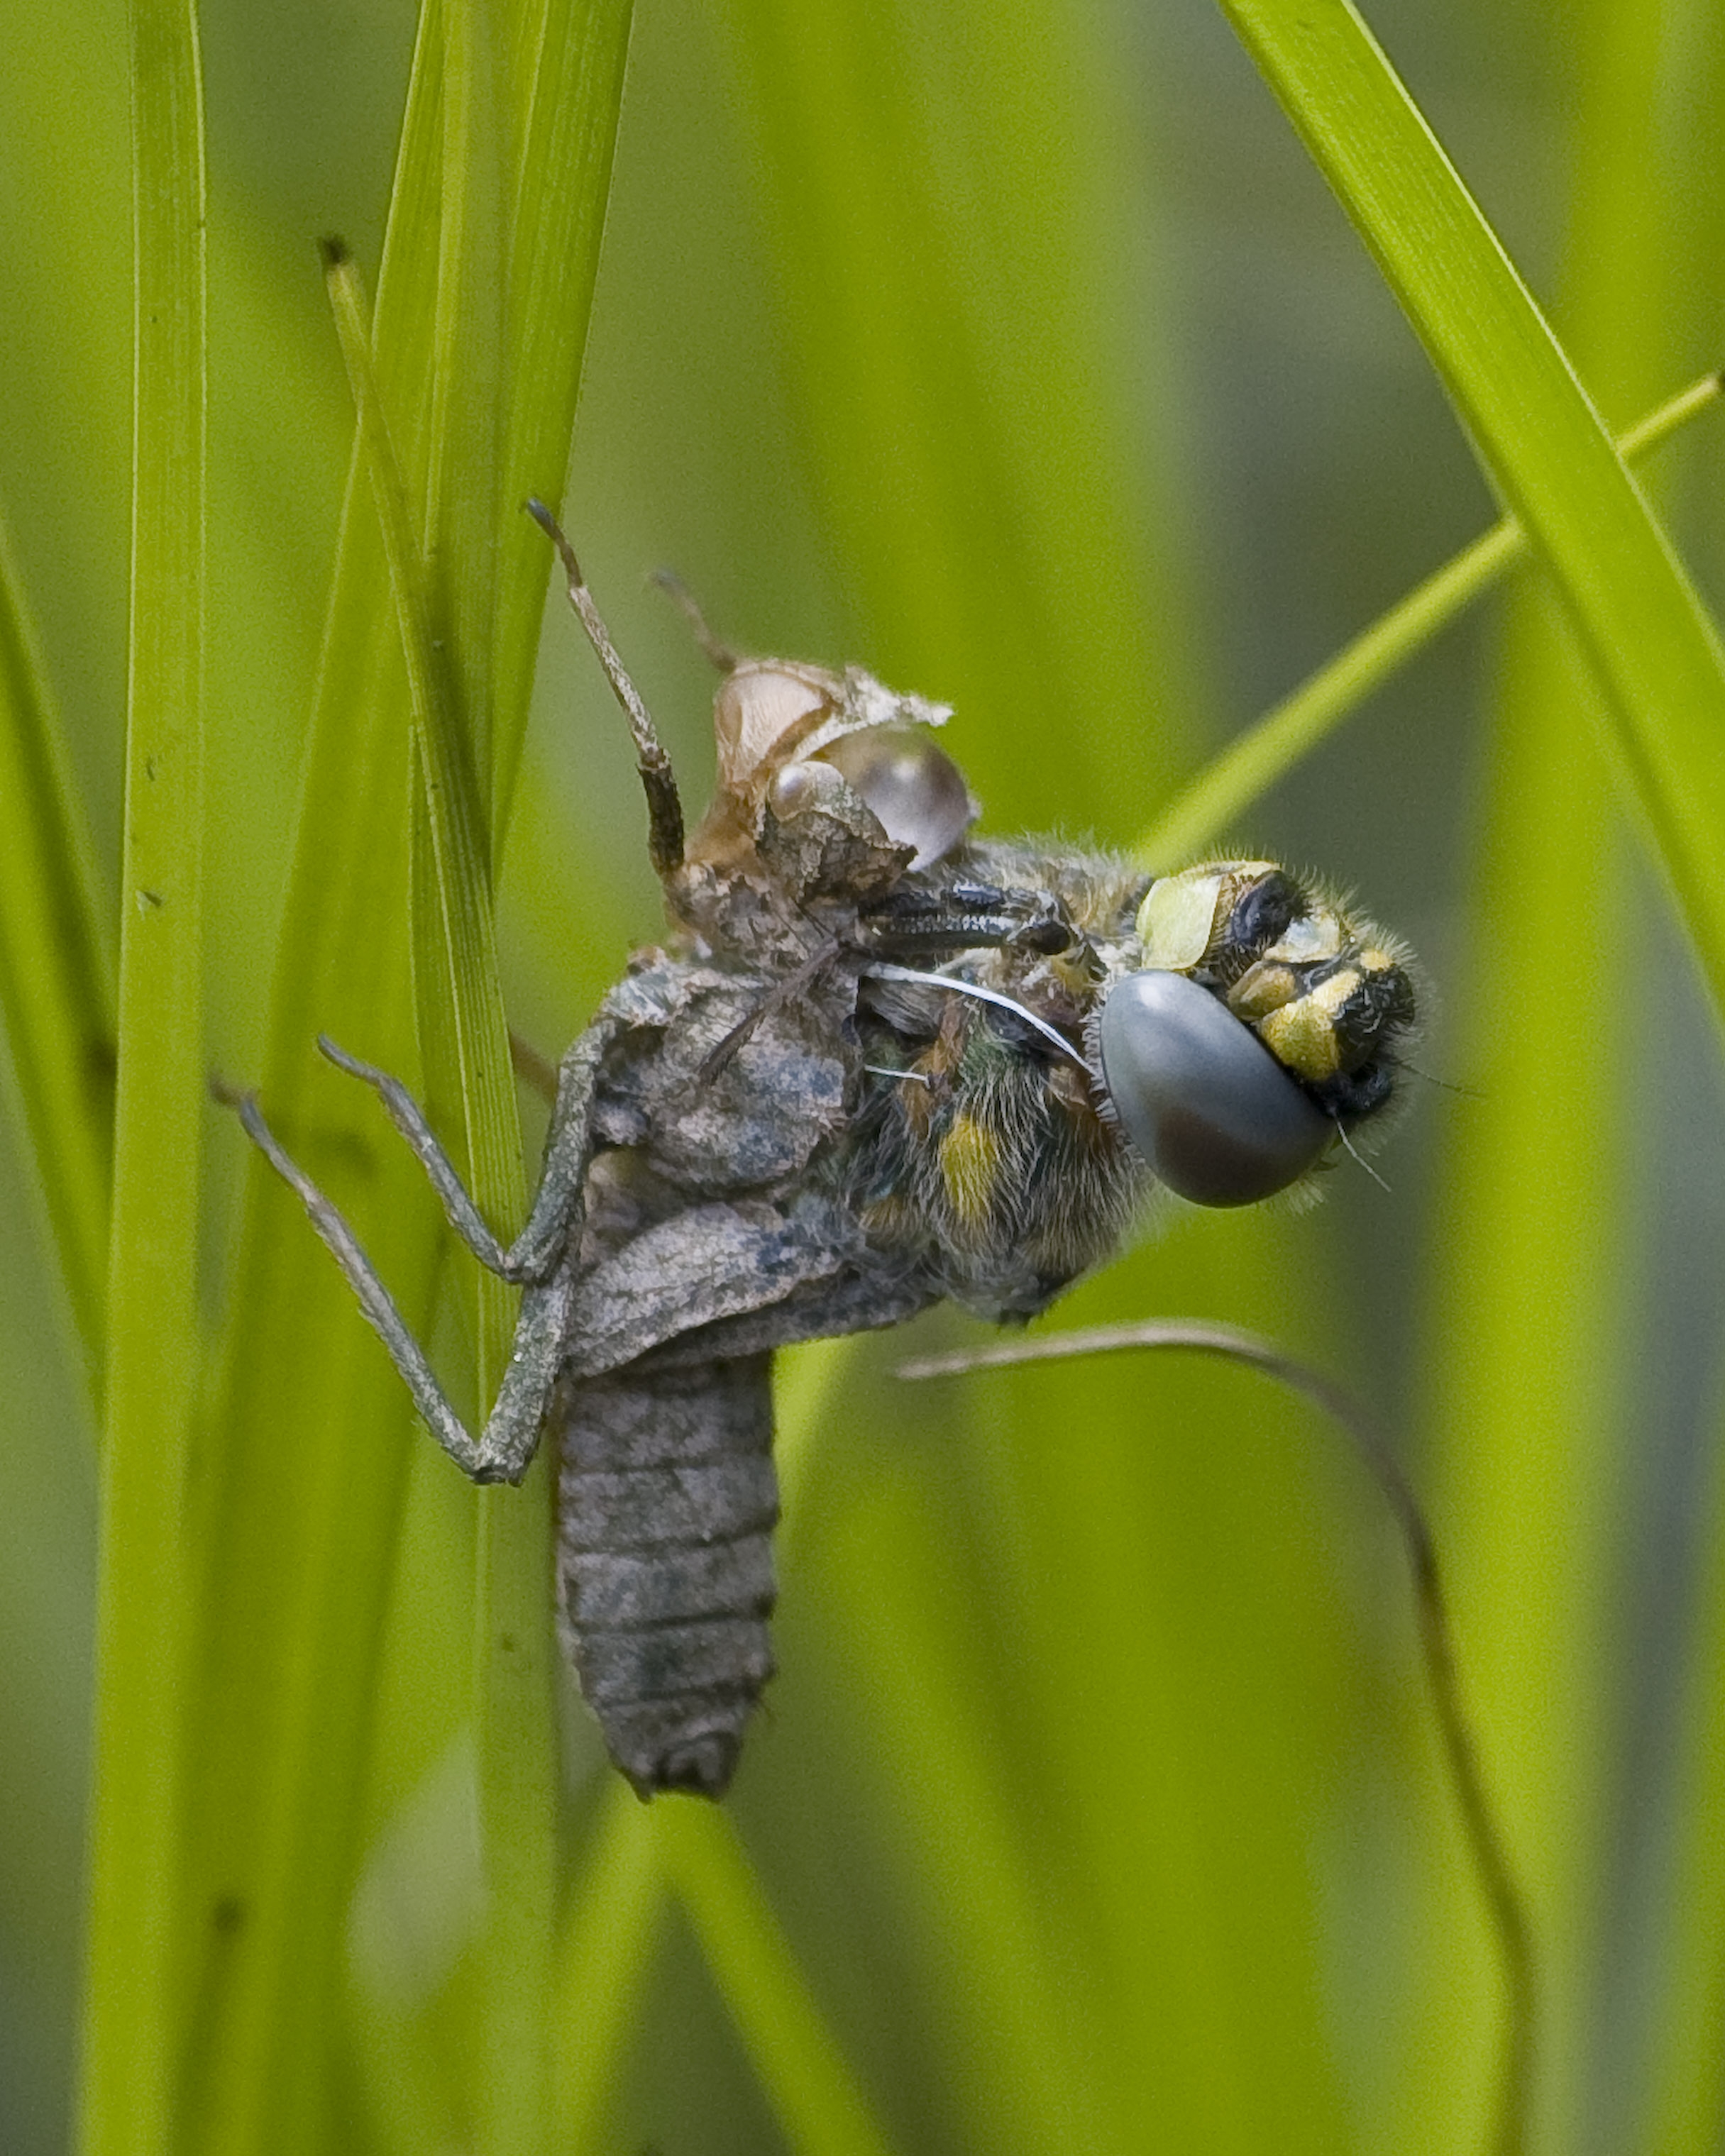 Adult dragonfly emerging from nymphal case attached to a reed stem.